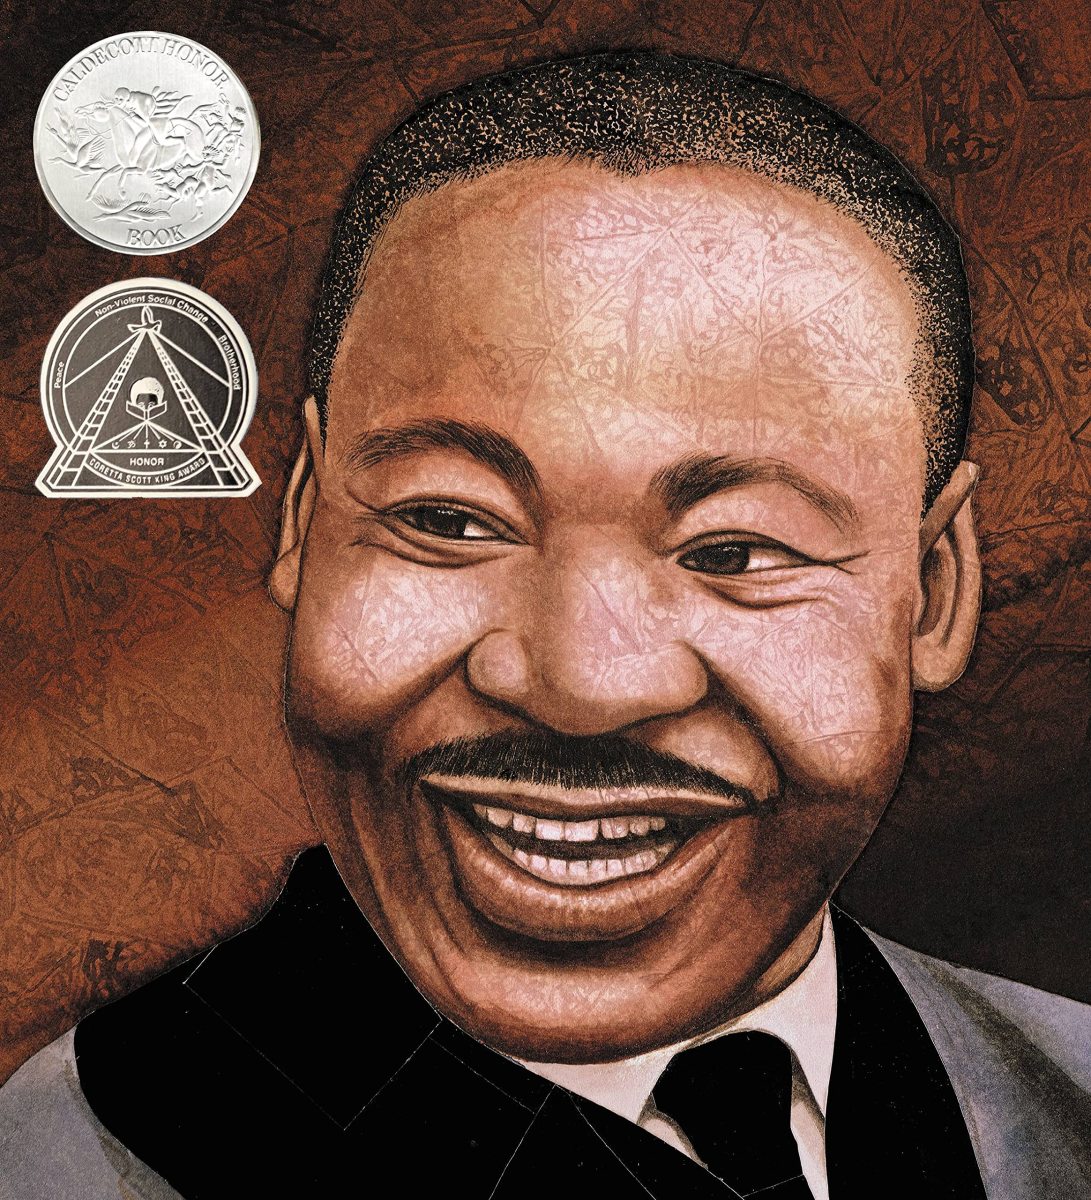 Martin's Big Words: The Life of Martin Luther King, Jr. by Doreen Rappaport